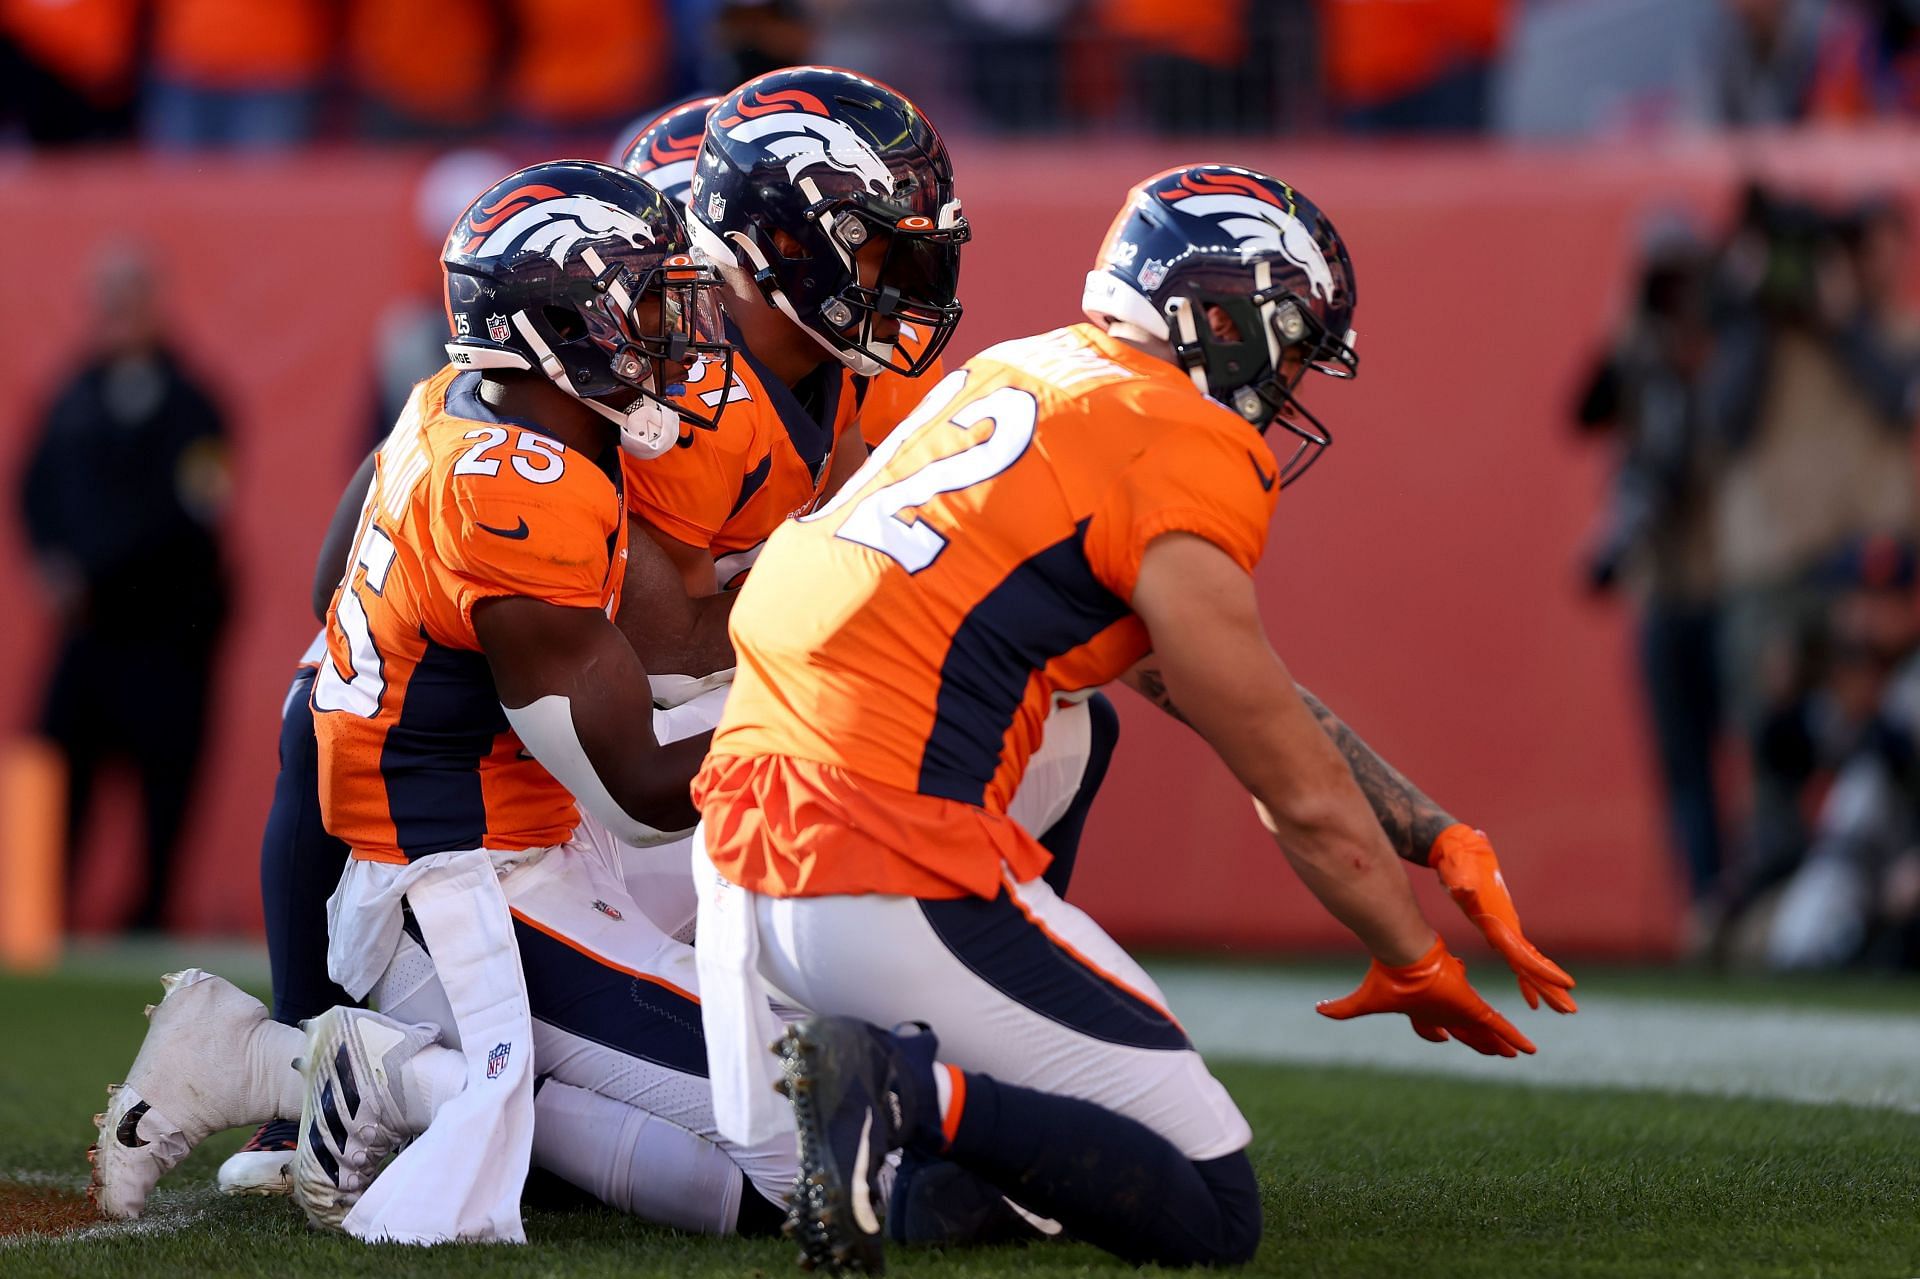 2022 Denver Broncos schedule: Complete schedule and matchup